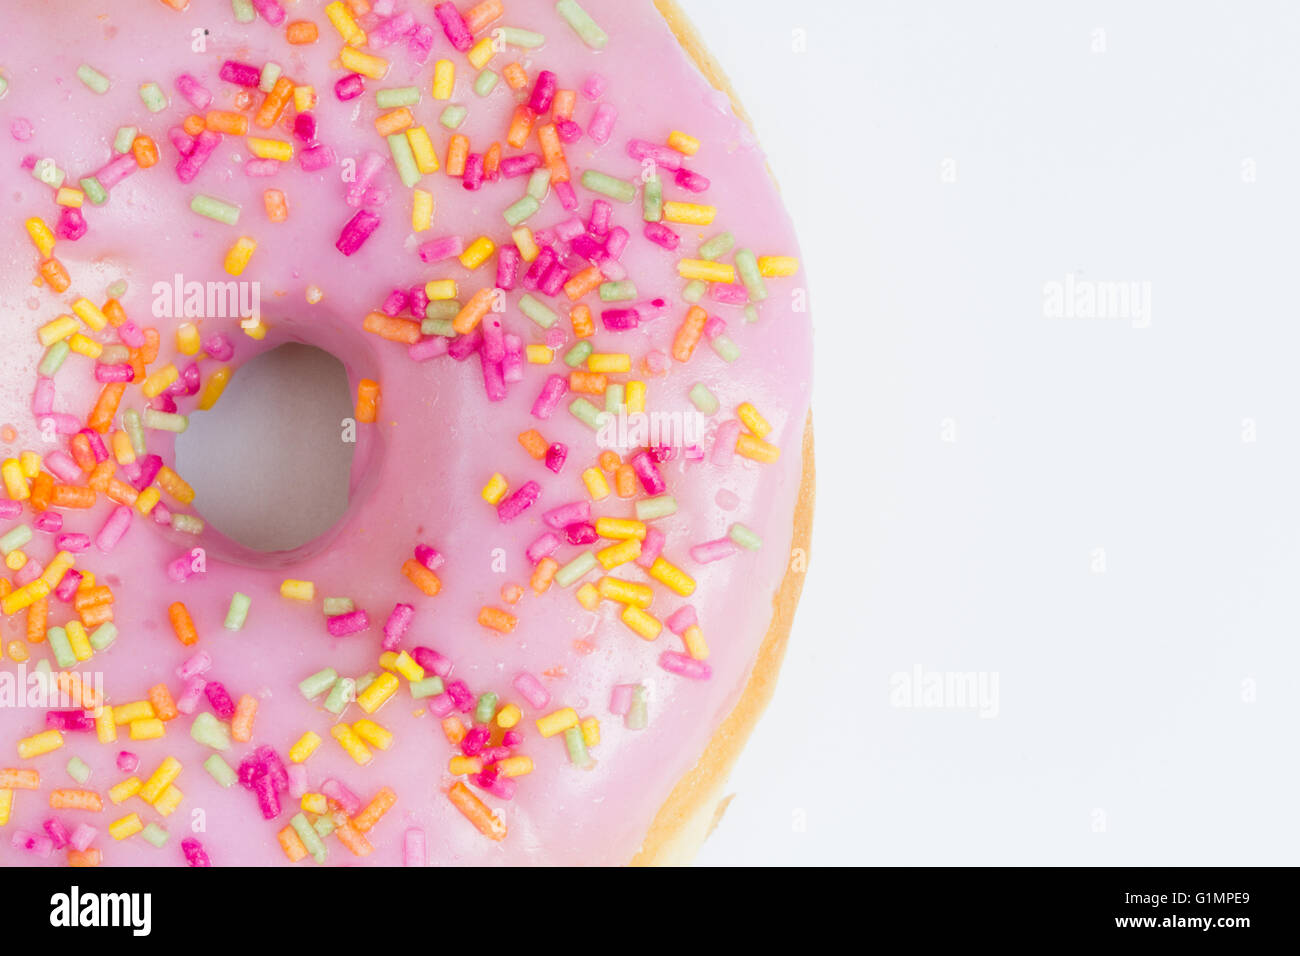 A large donut with pink icing and sprinkles showing its hole on an isolated white background. Stock Photo